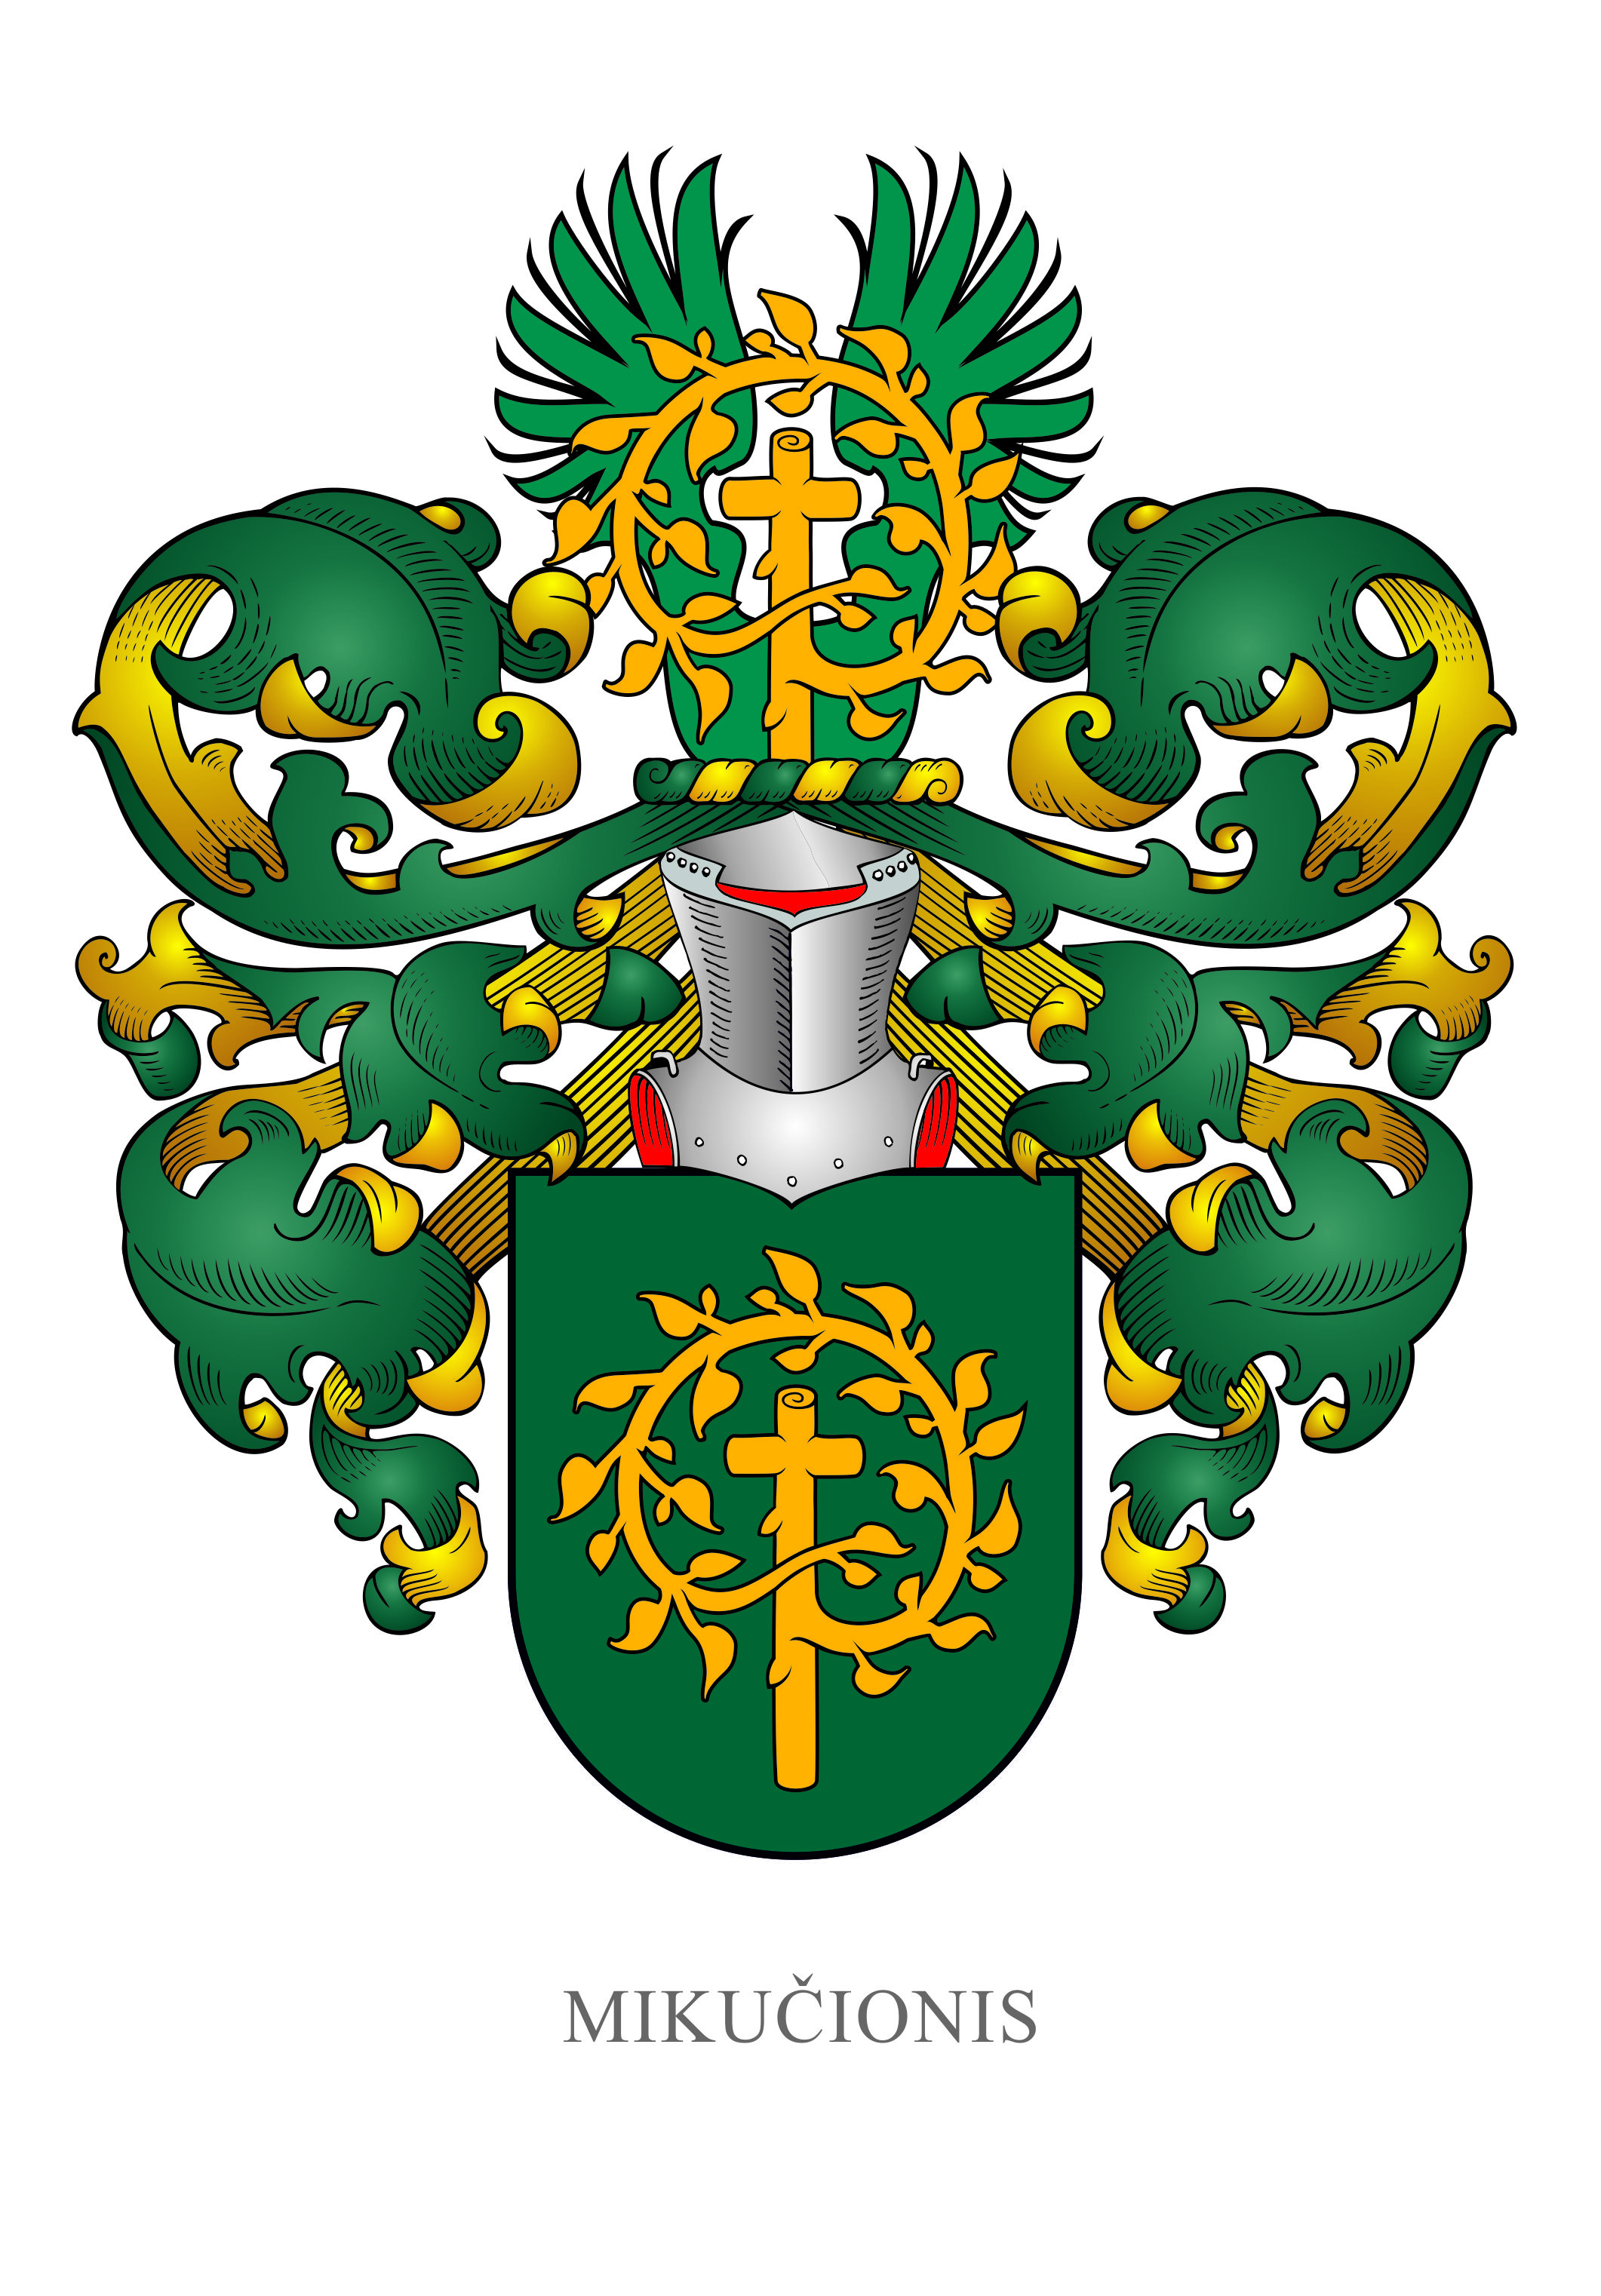 These are arms by another artist. Ignoring the fact that it has a name across the bottom, indicating some degree of ignorance, the emblazonment is quite elegant. The blazon might be a challenge however. Here is what I came up with for the blazon of the shield:

